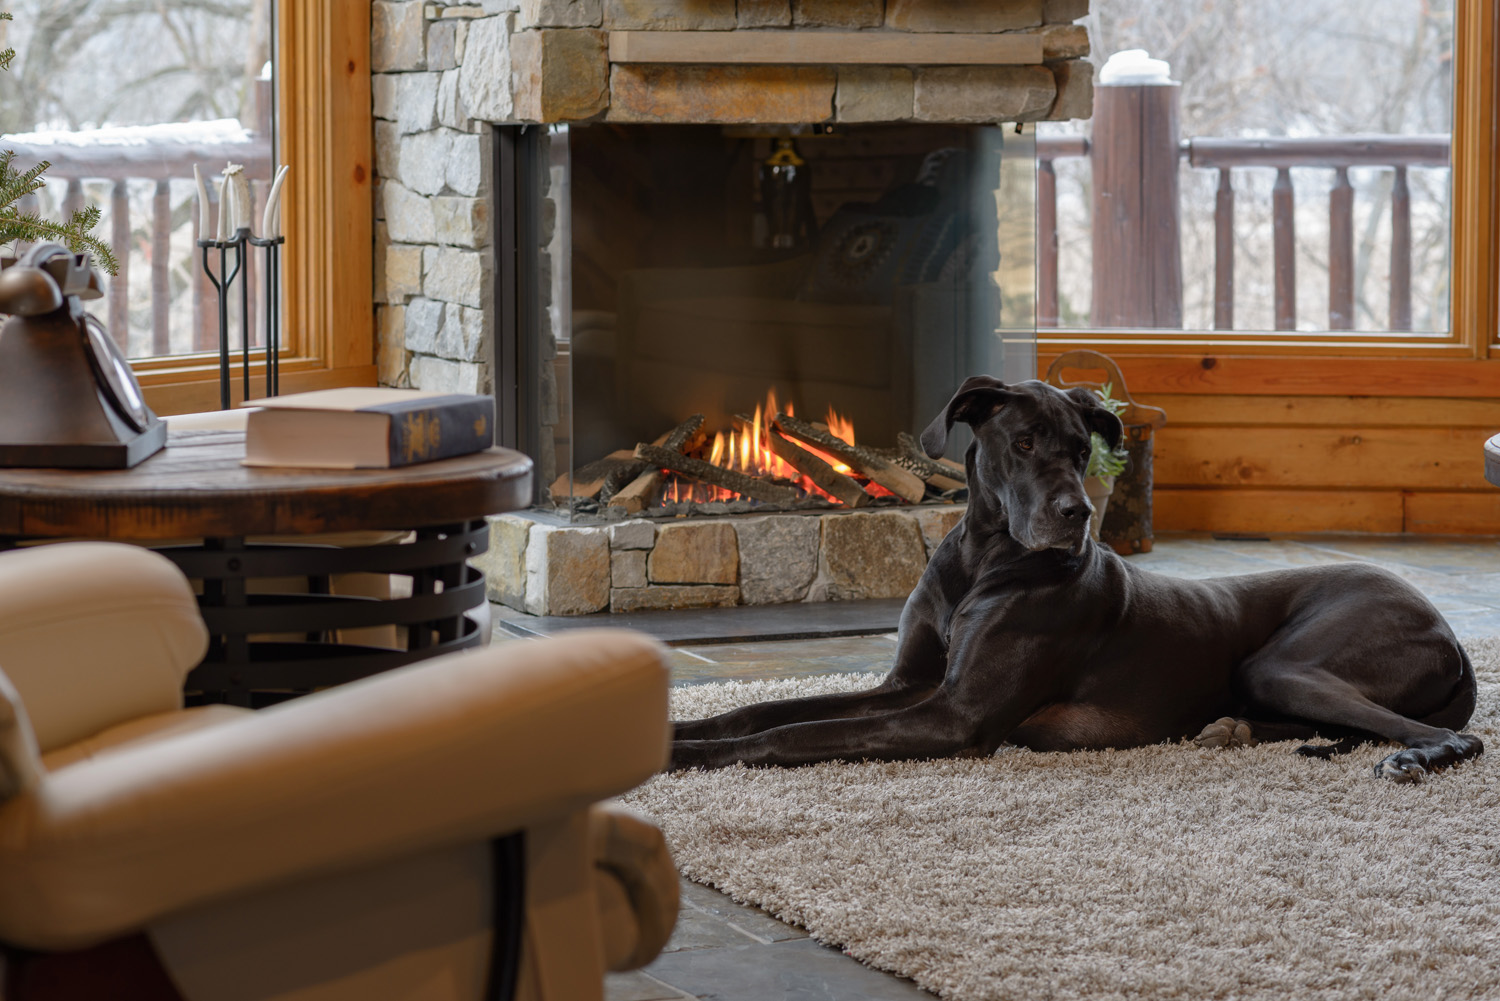 3 Sided Gas Fireplace with Stone Surround and Black Dog